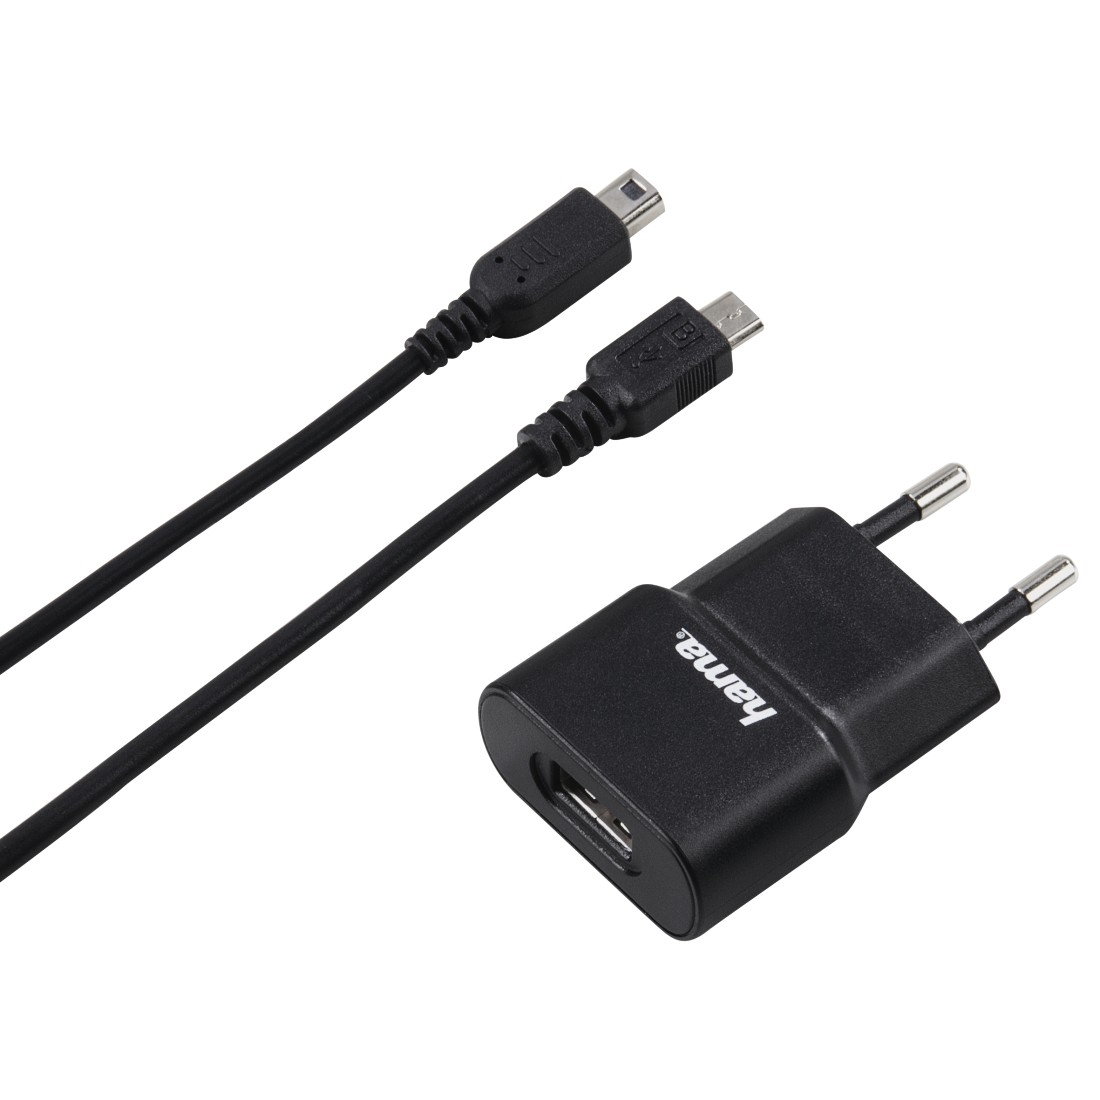 00053494 Hama USB Charger for Nintendo New 3DS, New 3DS XL and New 2DS XL,  black | hama.com